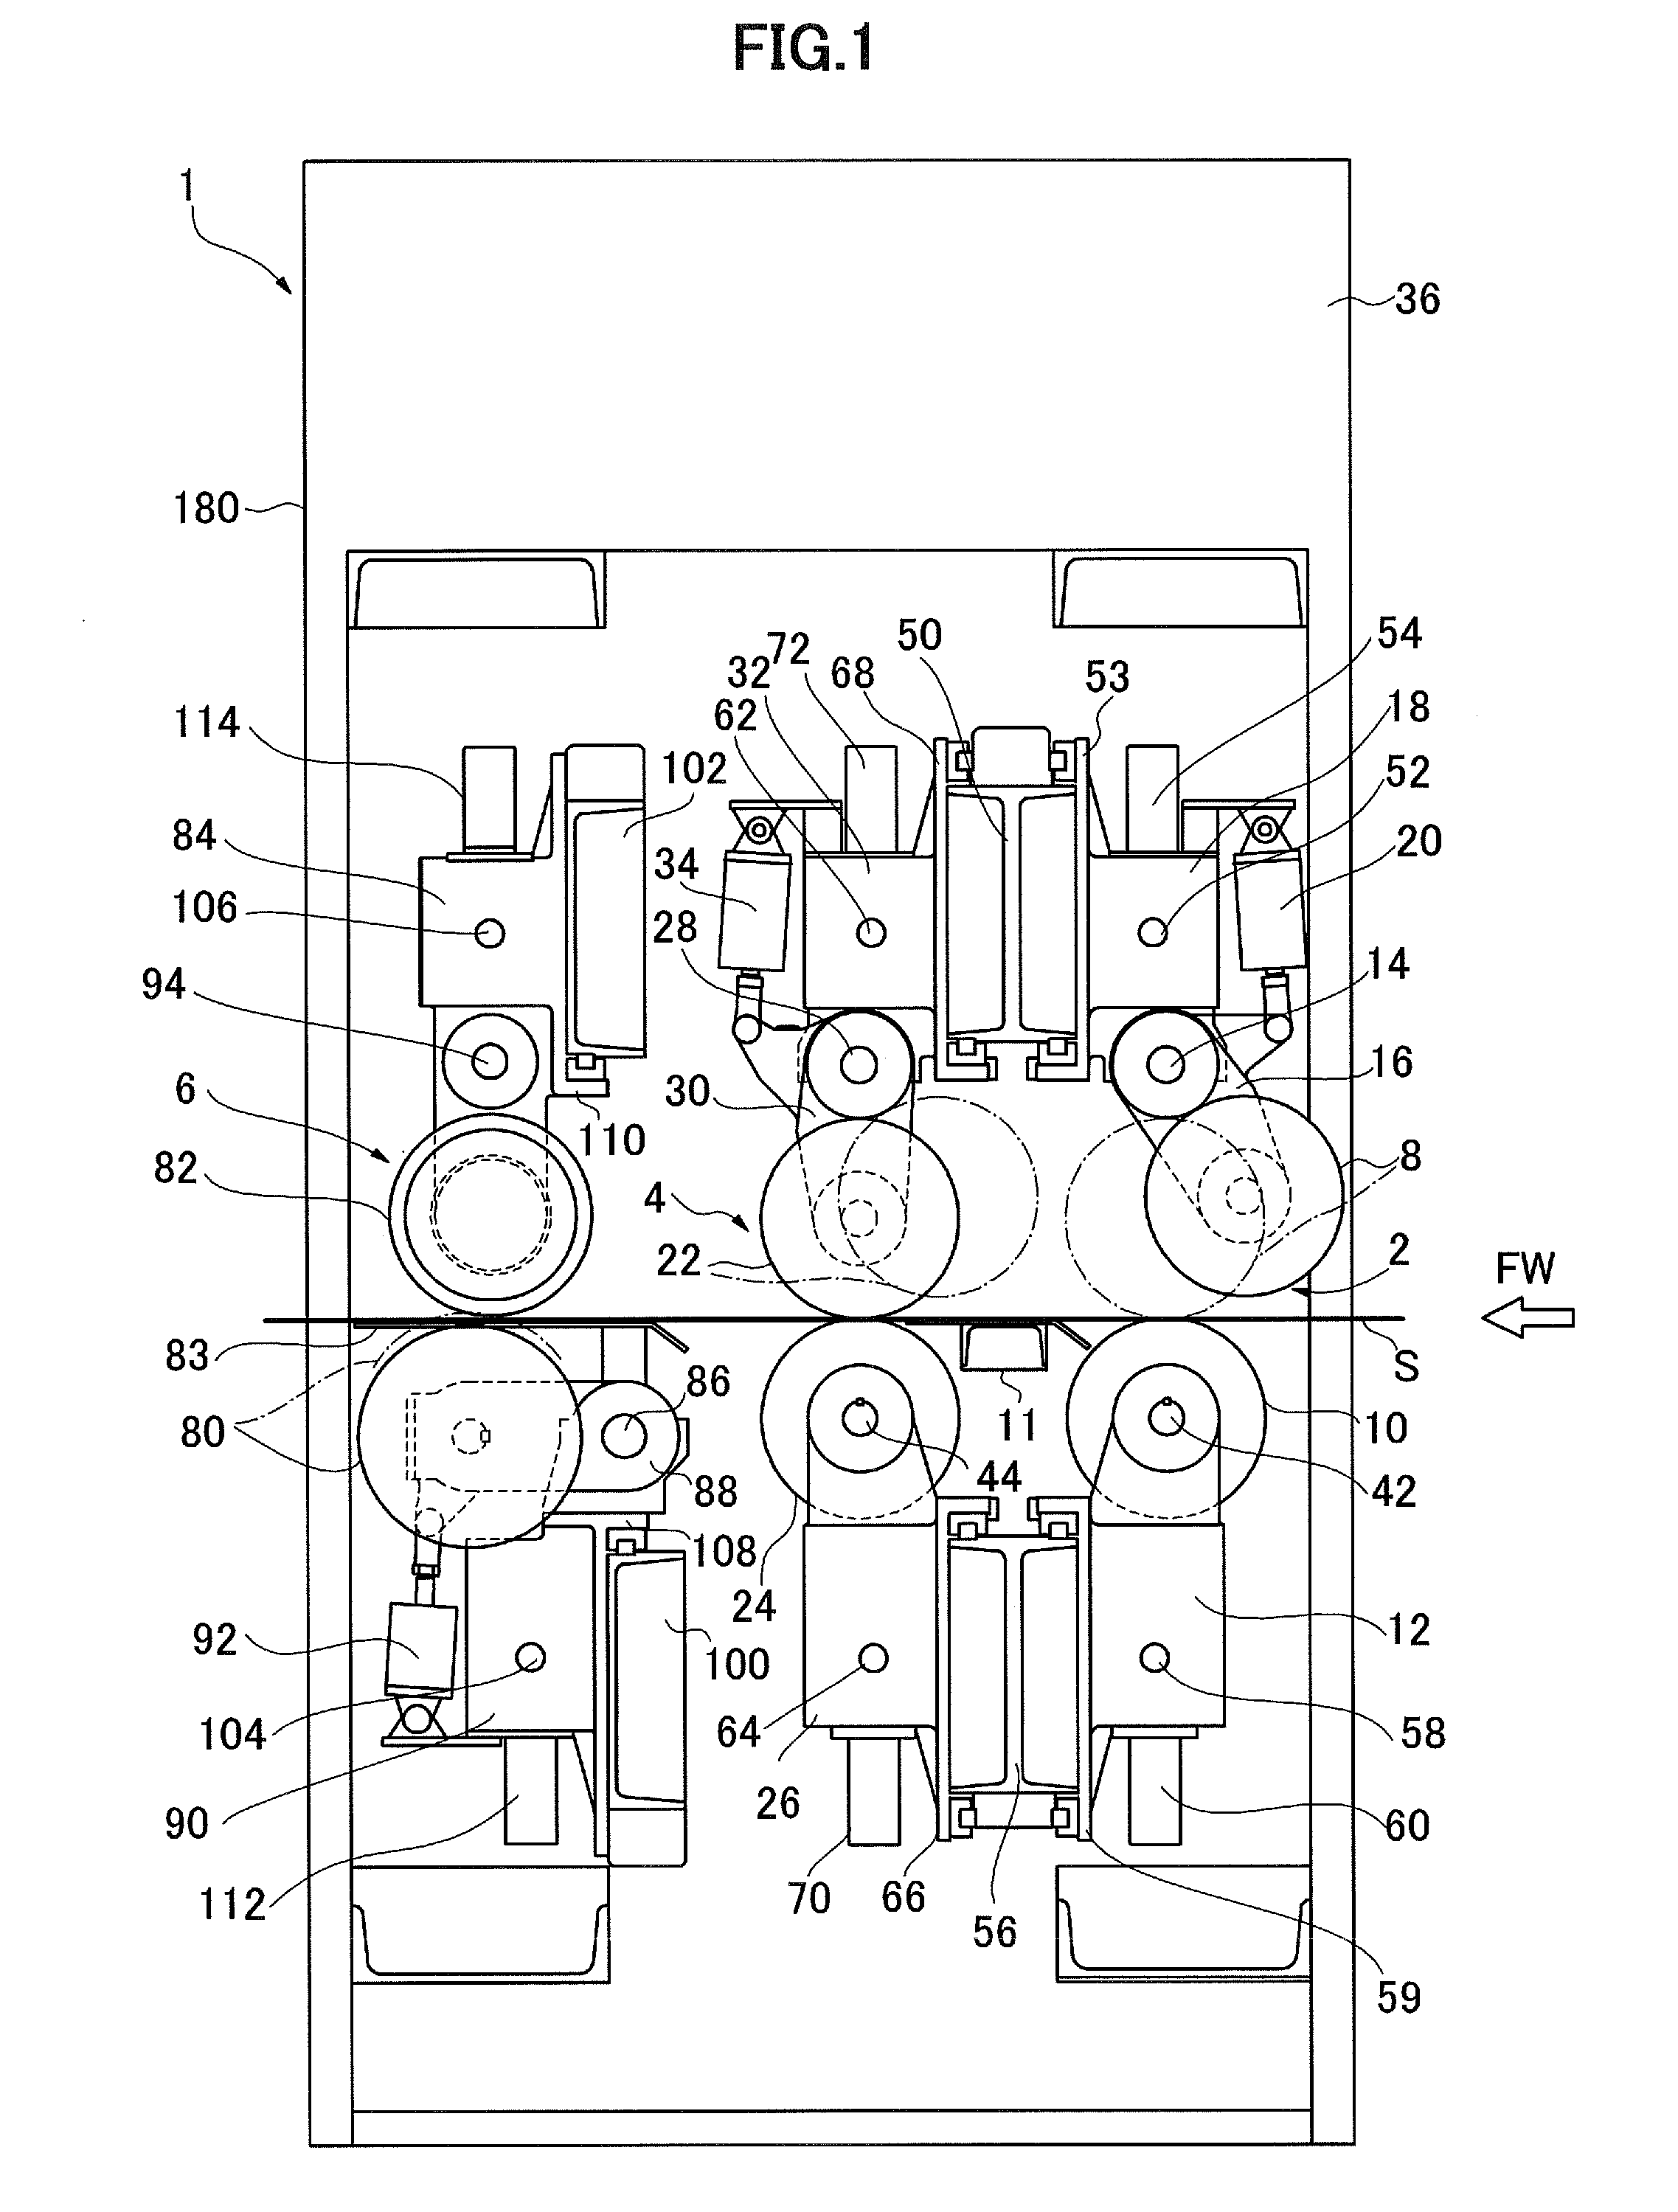 Paperboard sheet slitter-scorer apparatus and control method for correcting the positions of slitter knives and scorers thereof